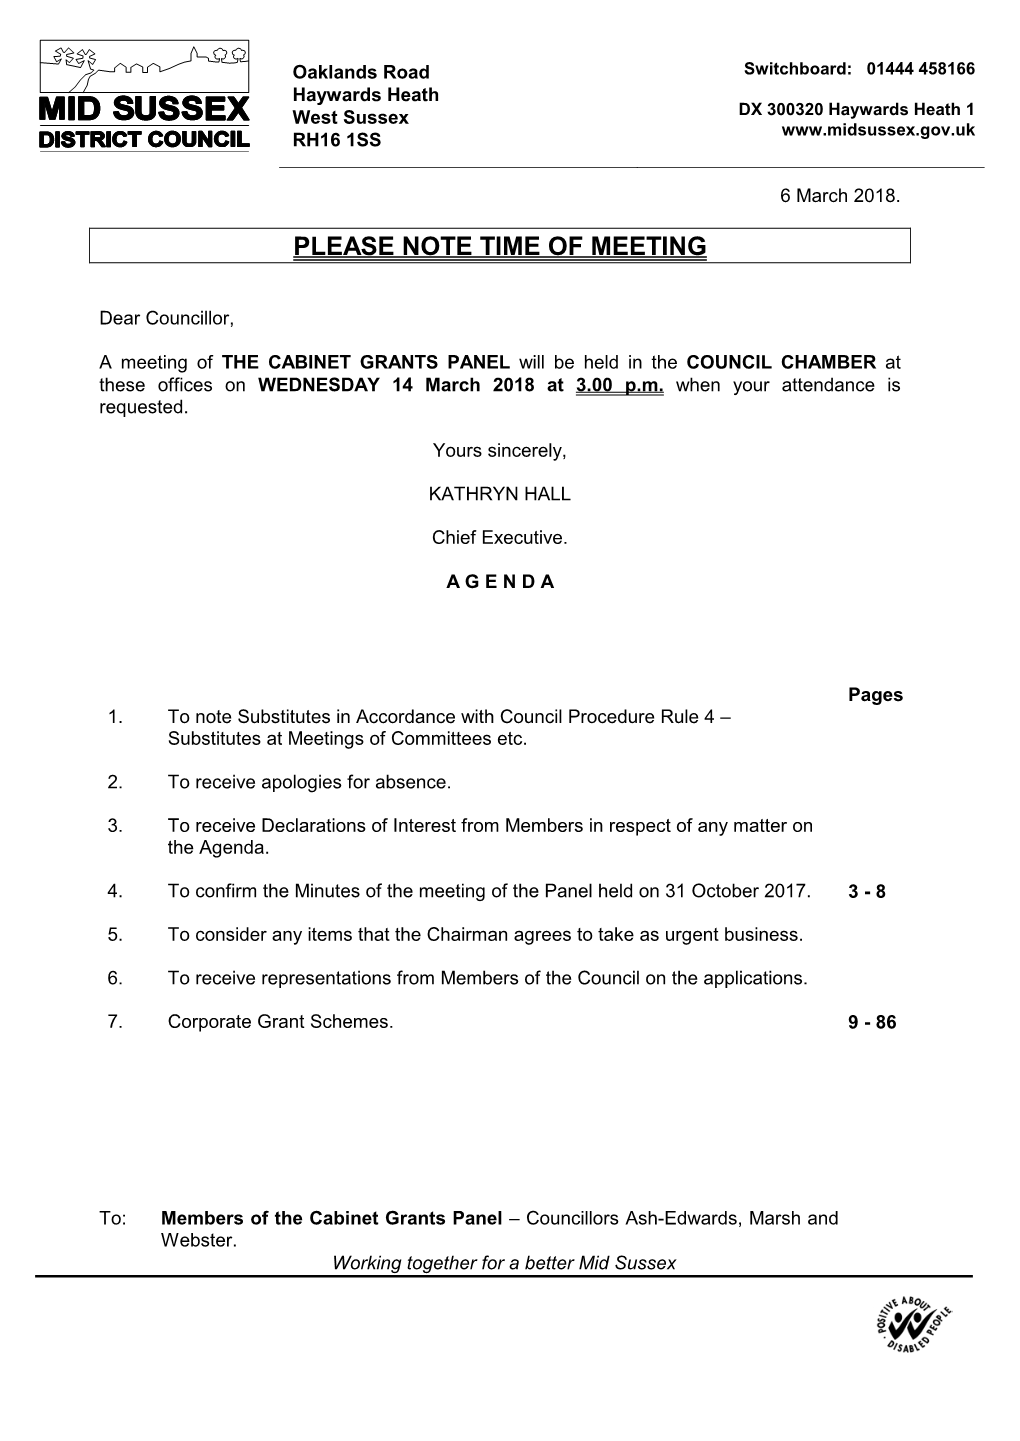 Please Note Time of Meeting